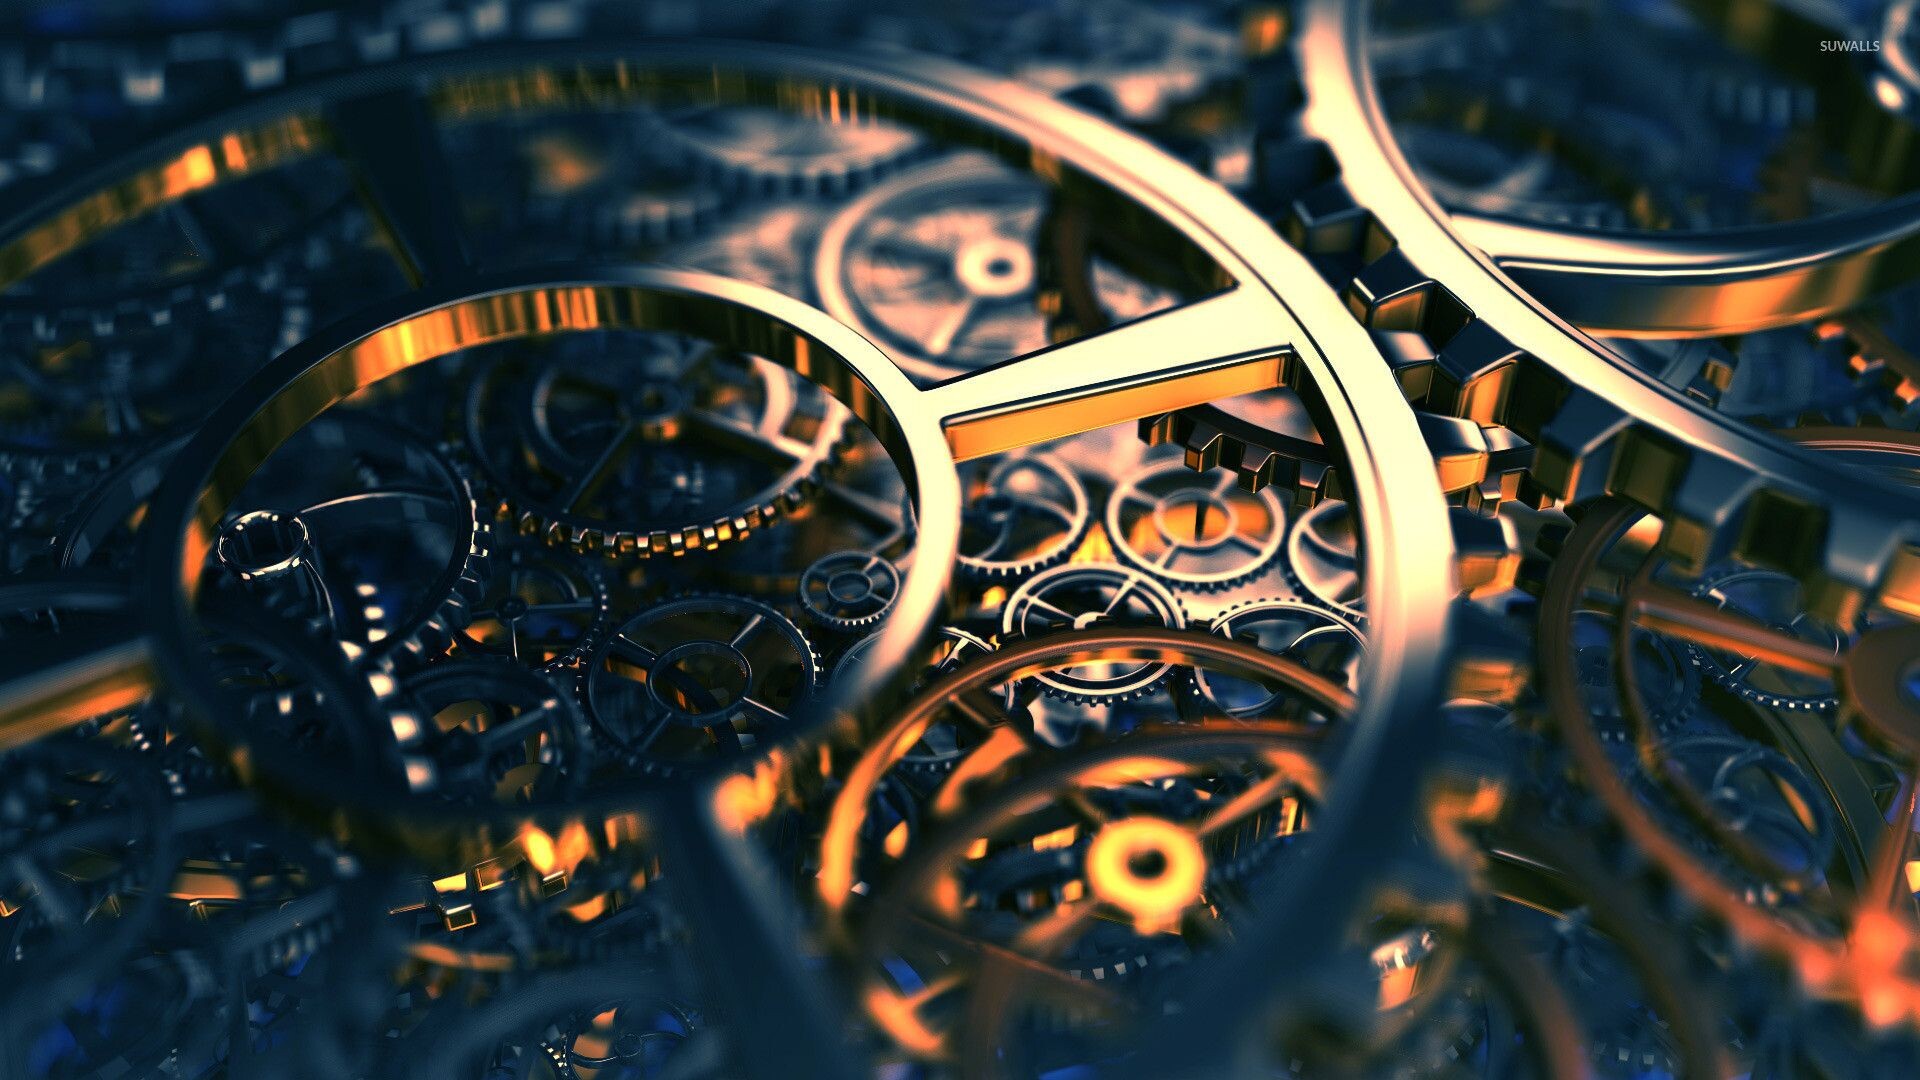 Gear: A system of two or more cogs meshed together, A mechanism for transmitting motion. 1920x1080 Full HD Background.